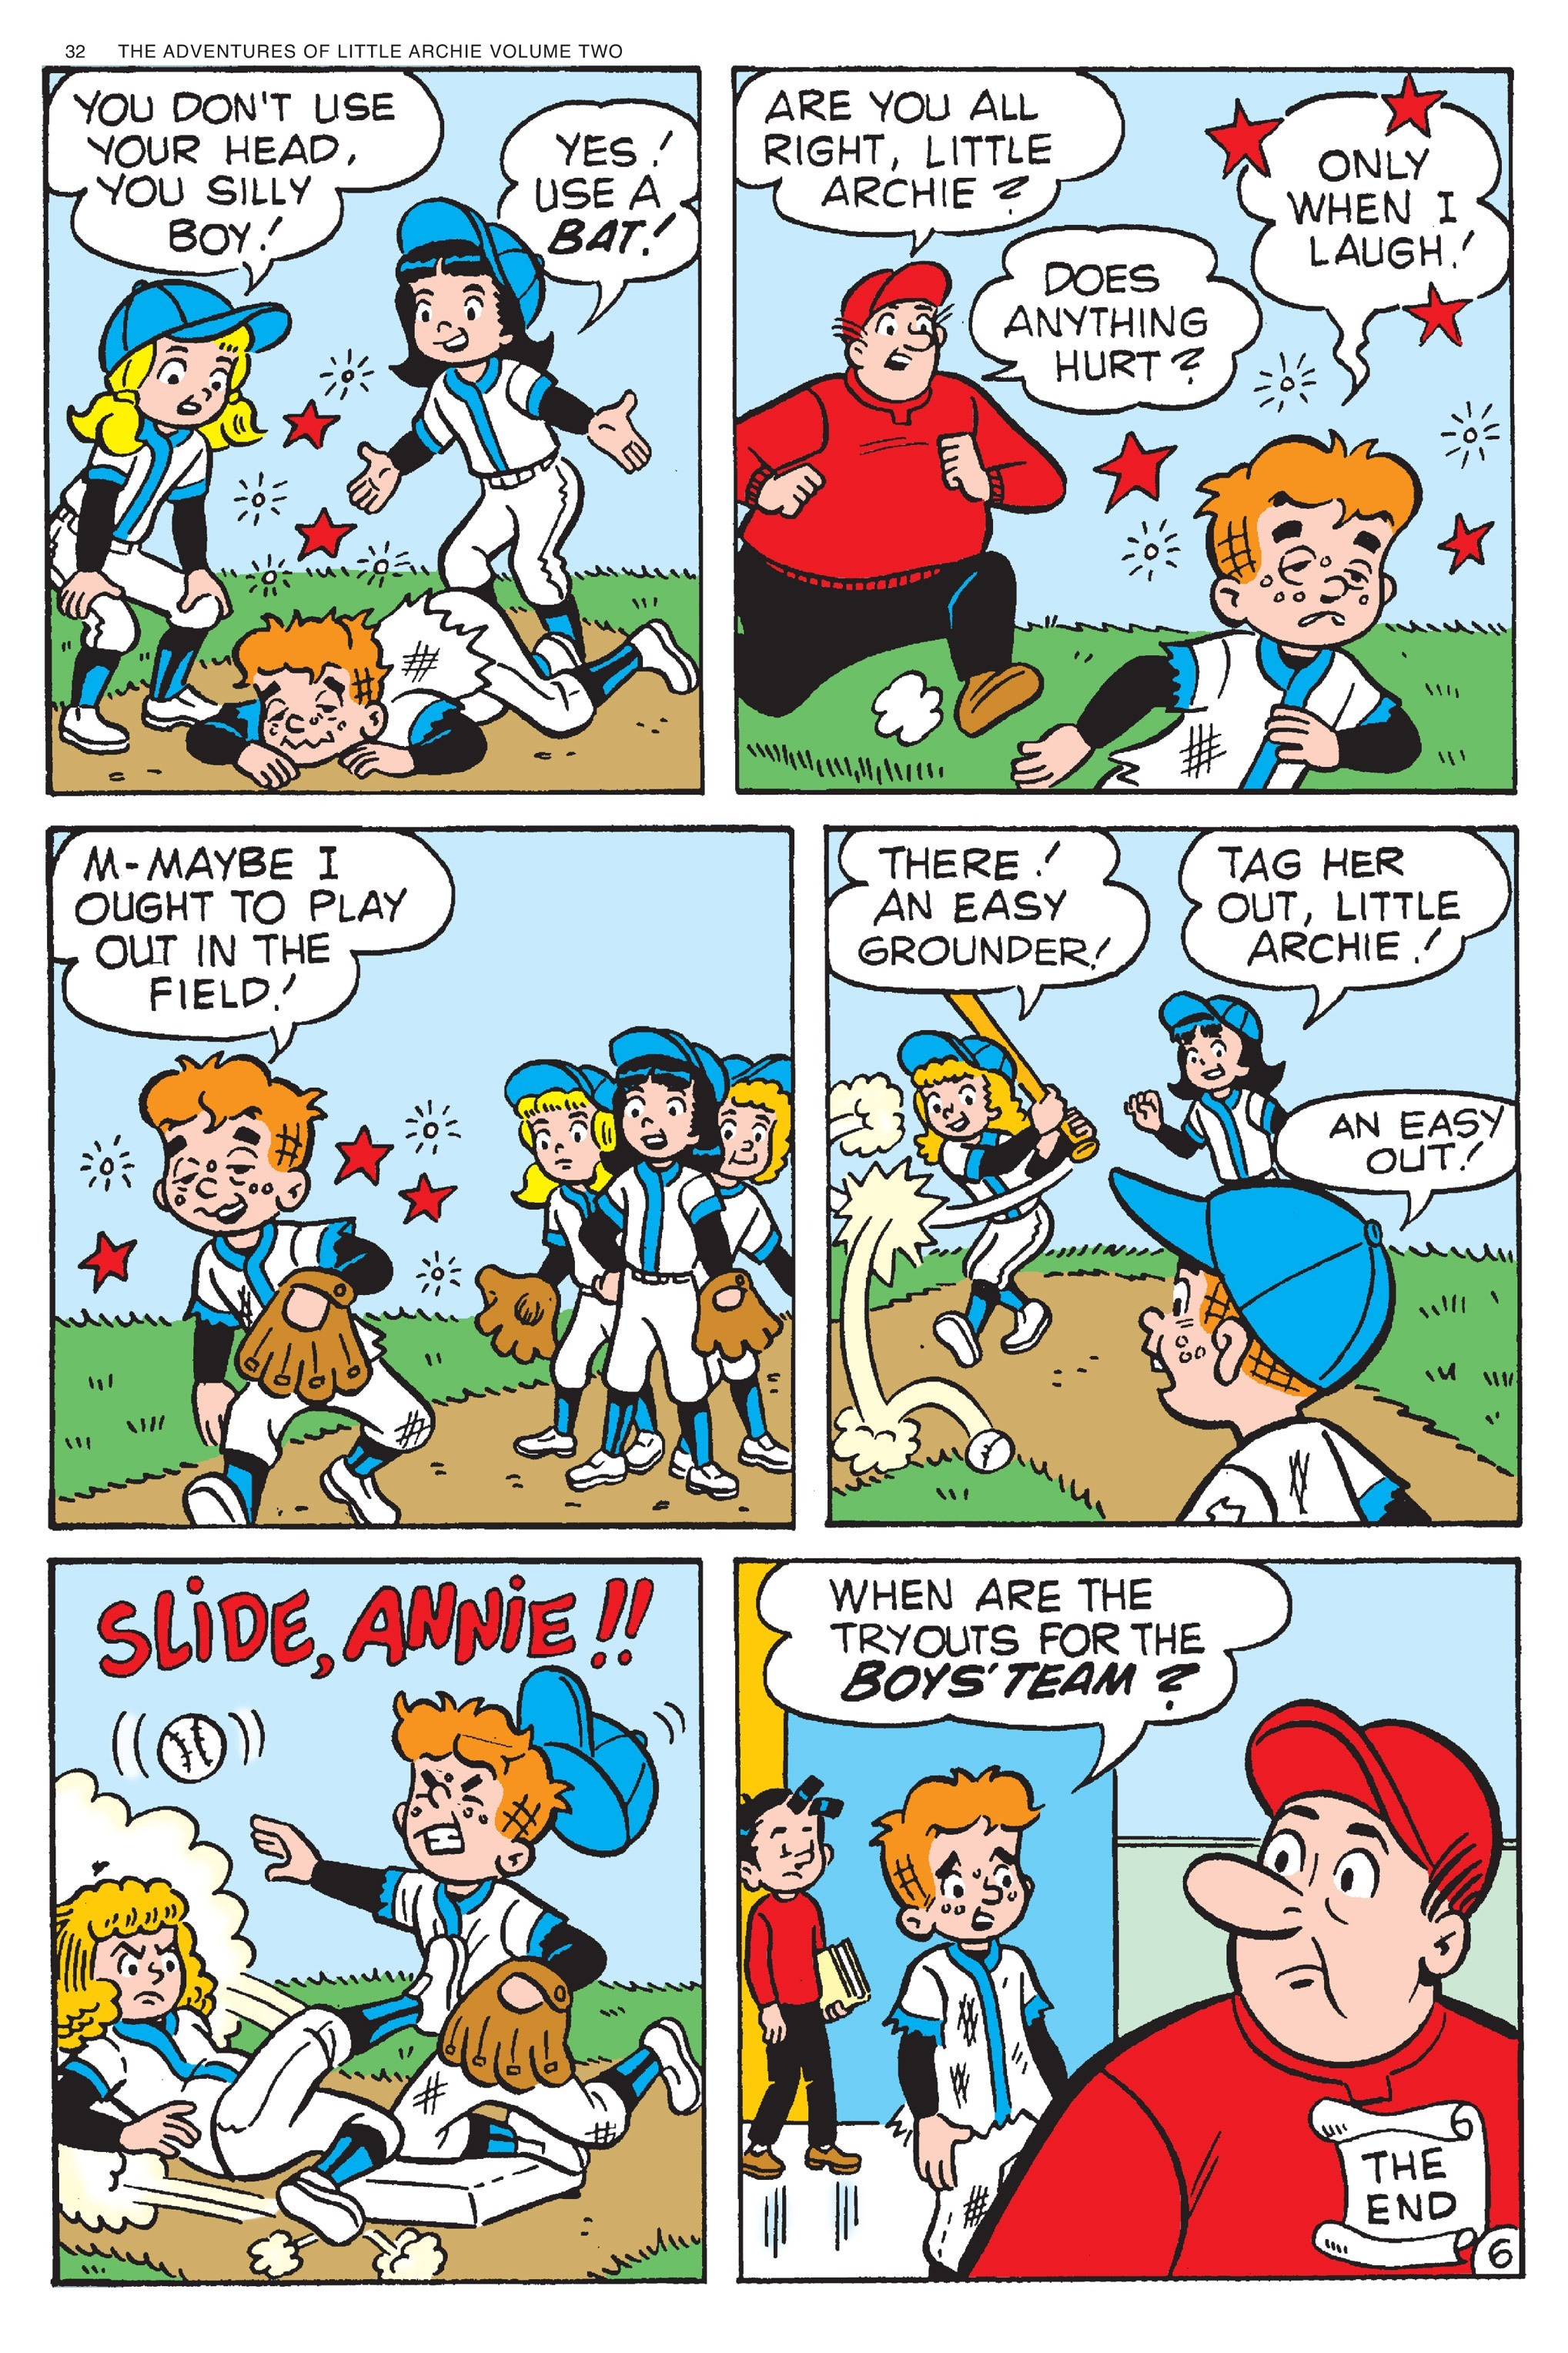 Read online Adventures of Little Archie comic -  Issue # TPB 2 - 33